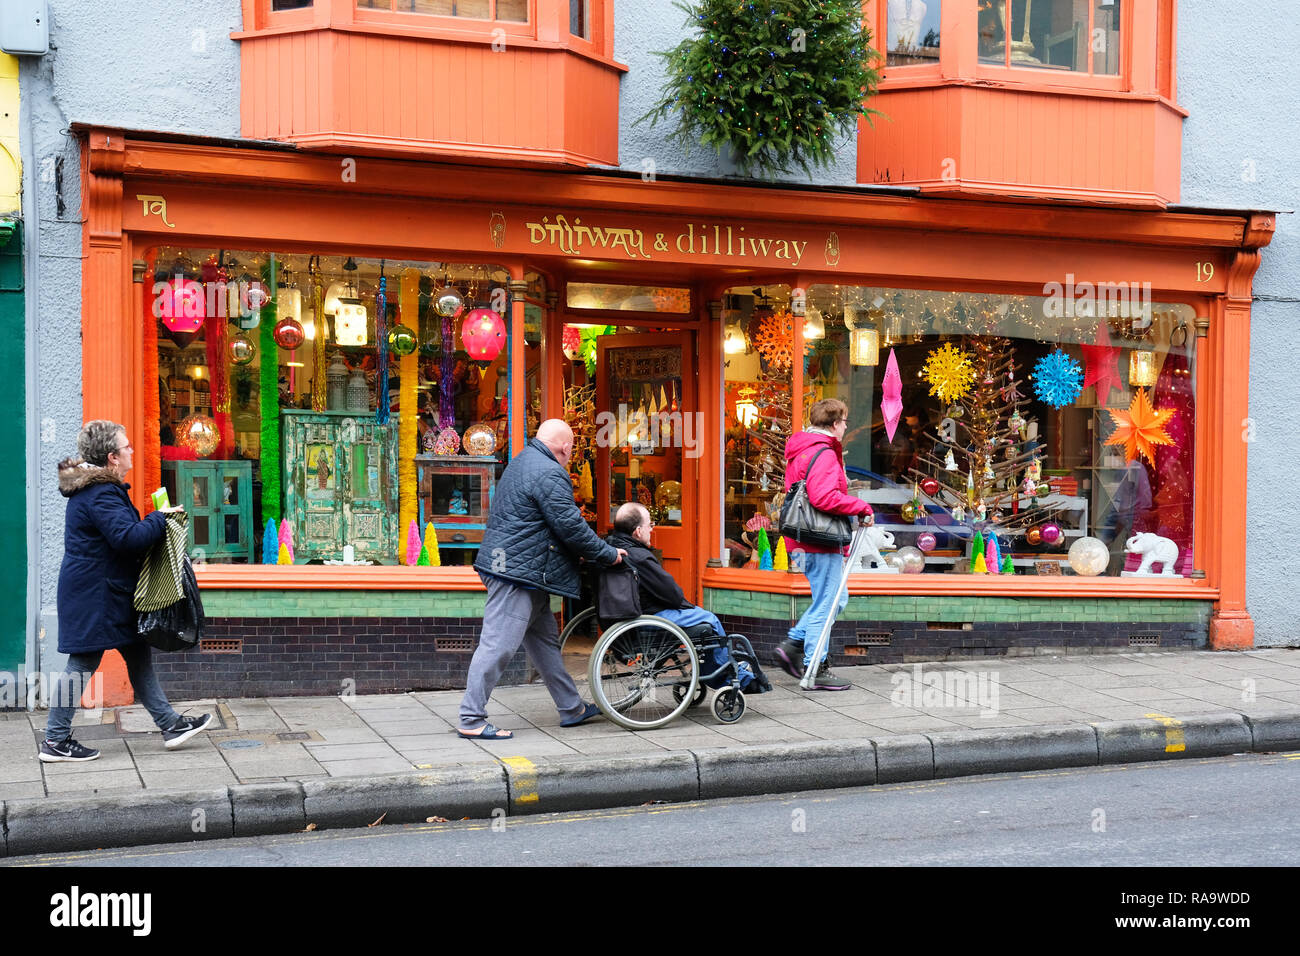 Disabled person being pushed in a wheelchair in front of a new age shop, Glastonbury, Somerset, UK - John Gollop Stock Photo